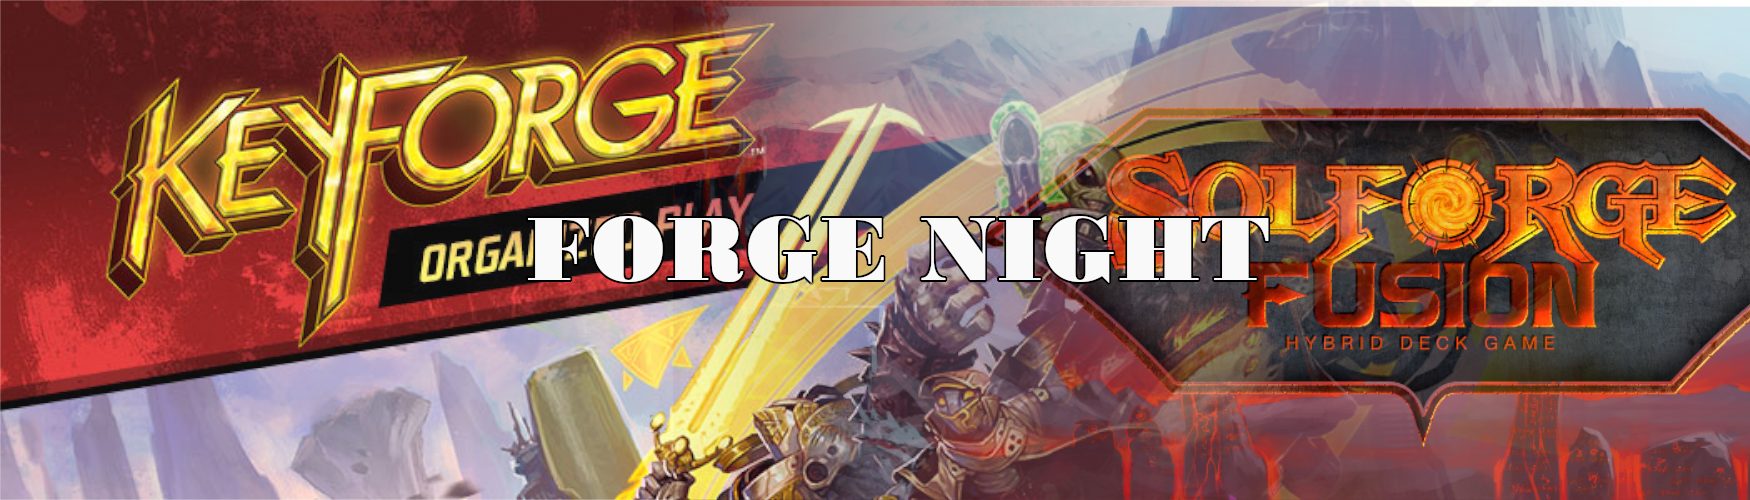 Keyforge and SolForge Fusion Open Play Night